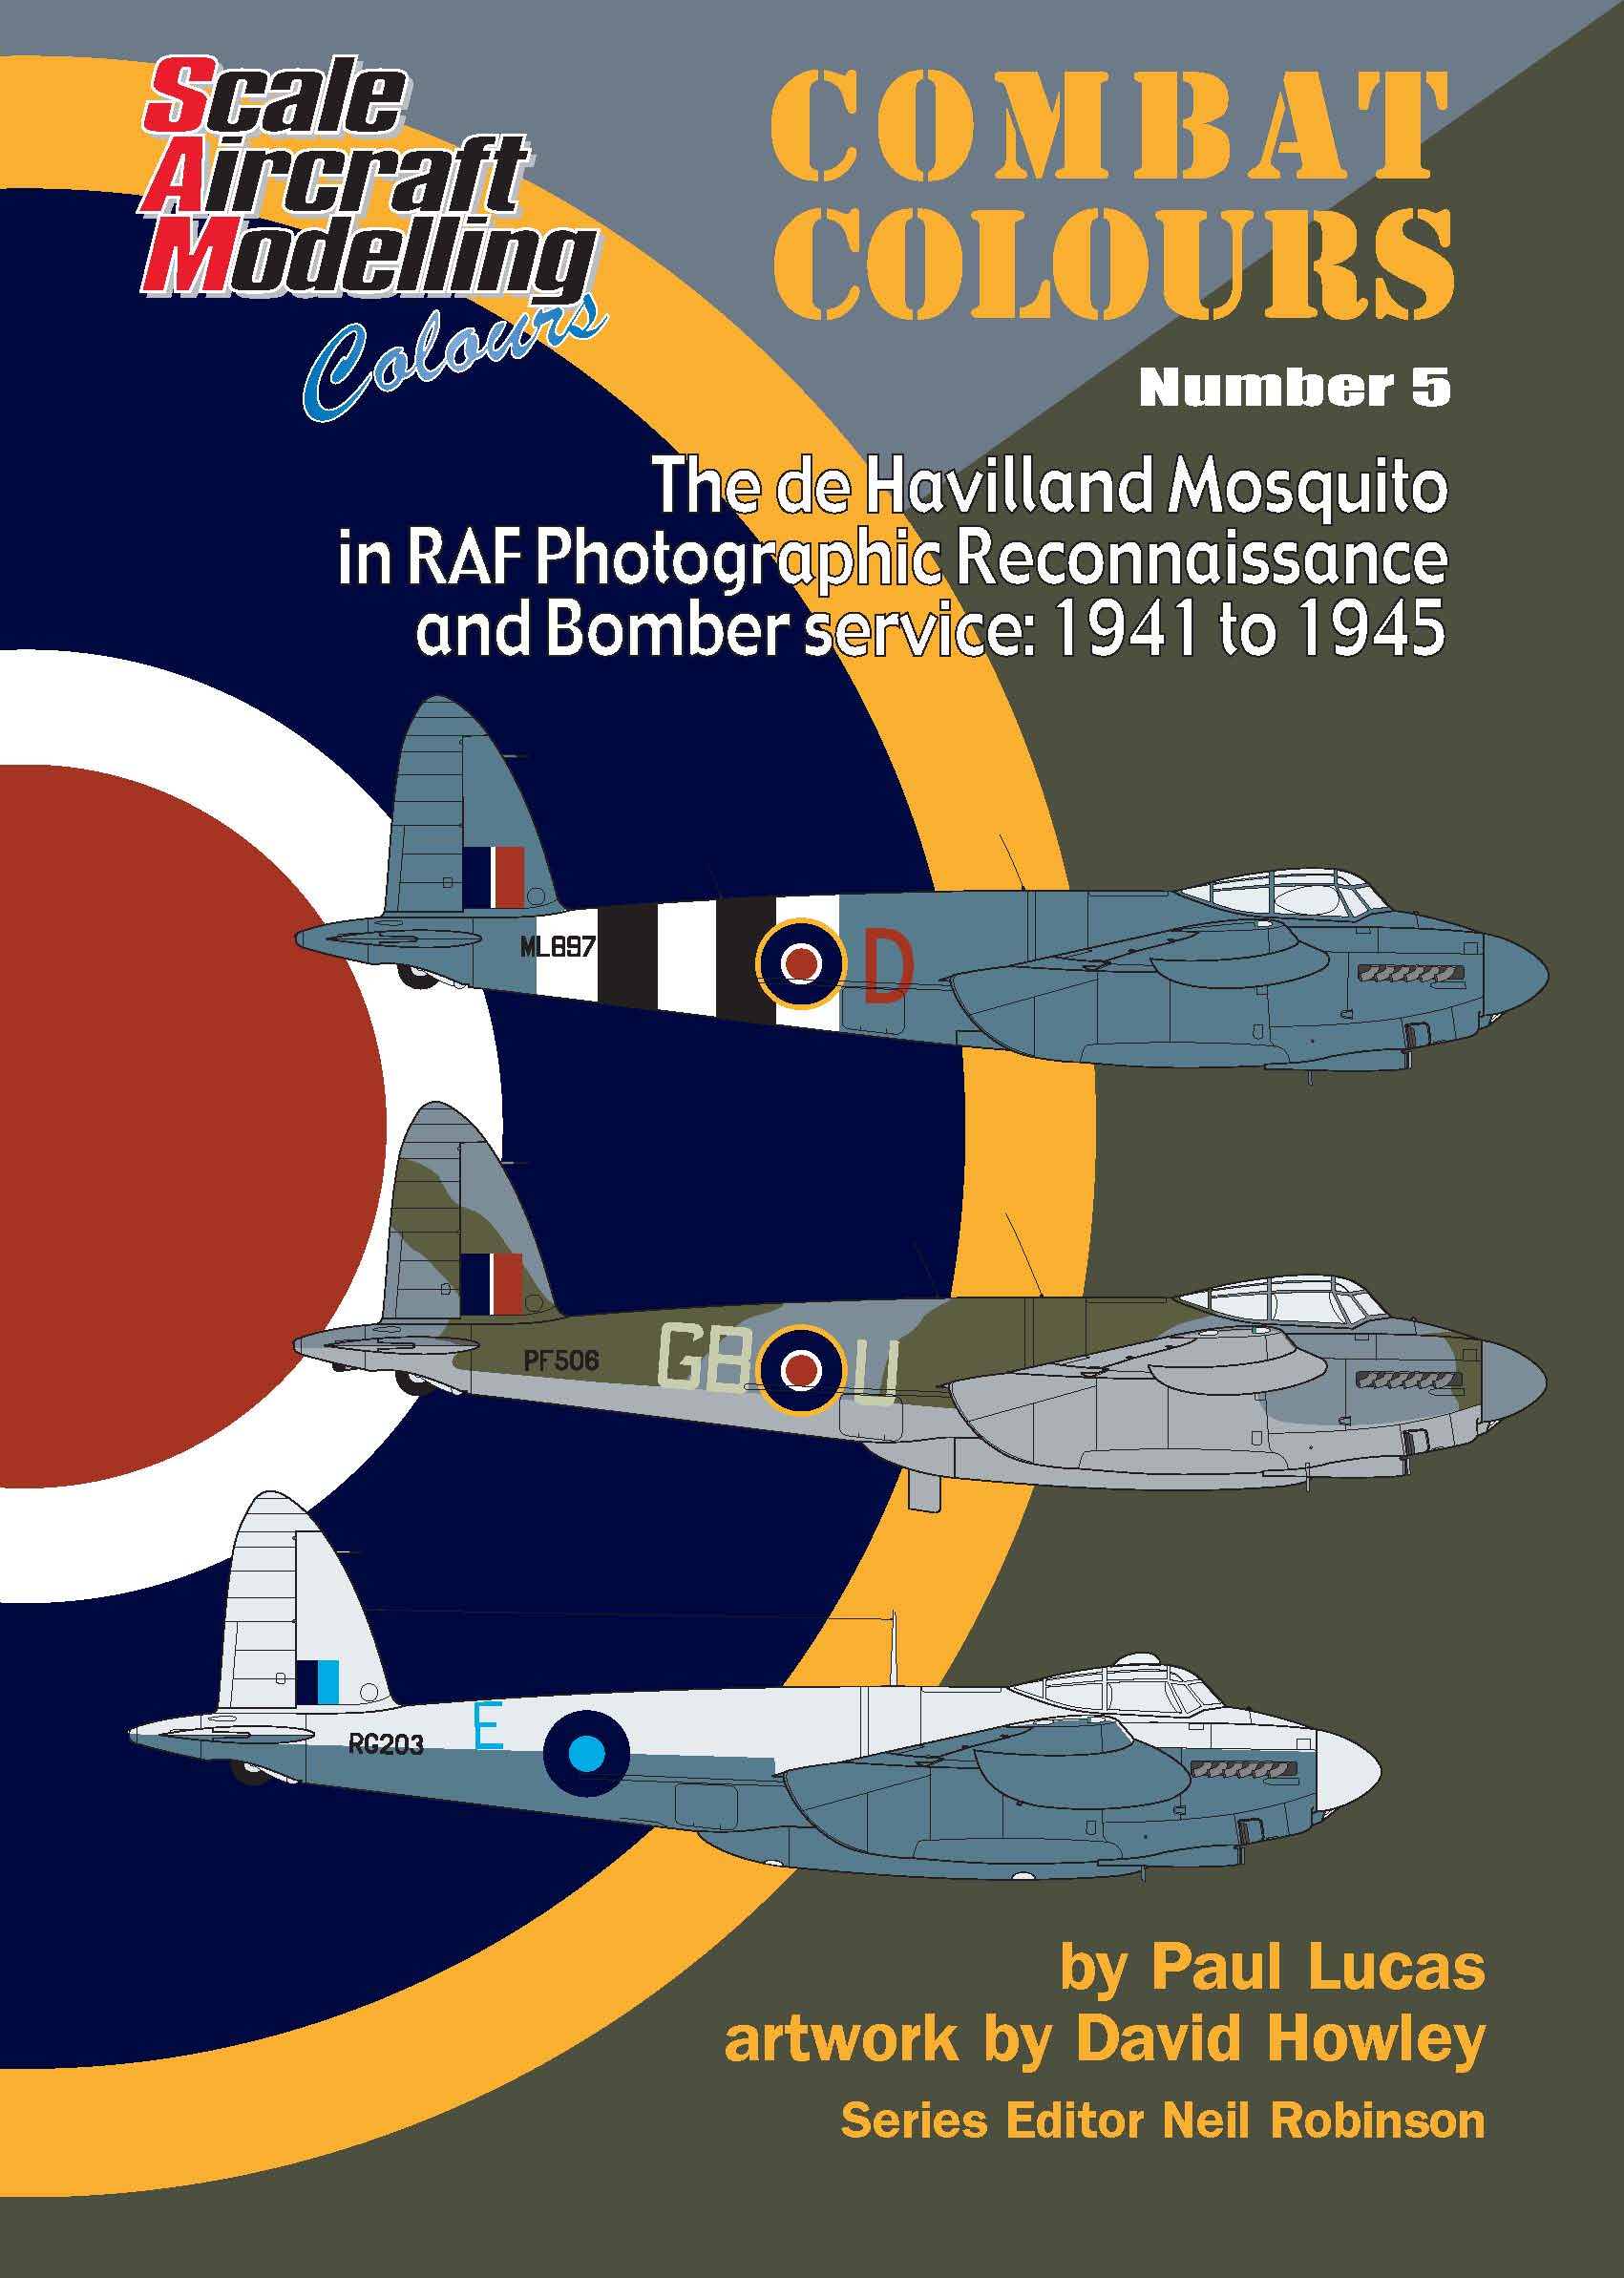 Guideline Publications Combat Colours no 5 The de Havilland Mosquito Combat Colours no 5 The de Havilland Mosquito in RAF Photographic Reconnaissance and Bomber service 1941to 1945 